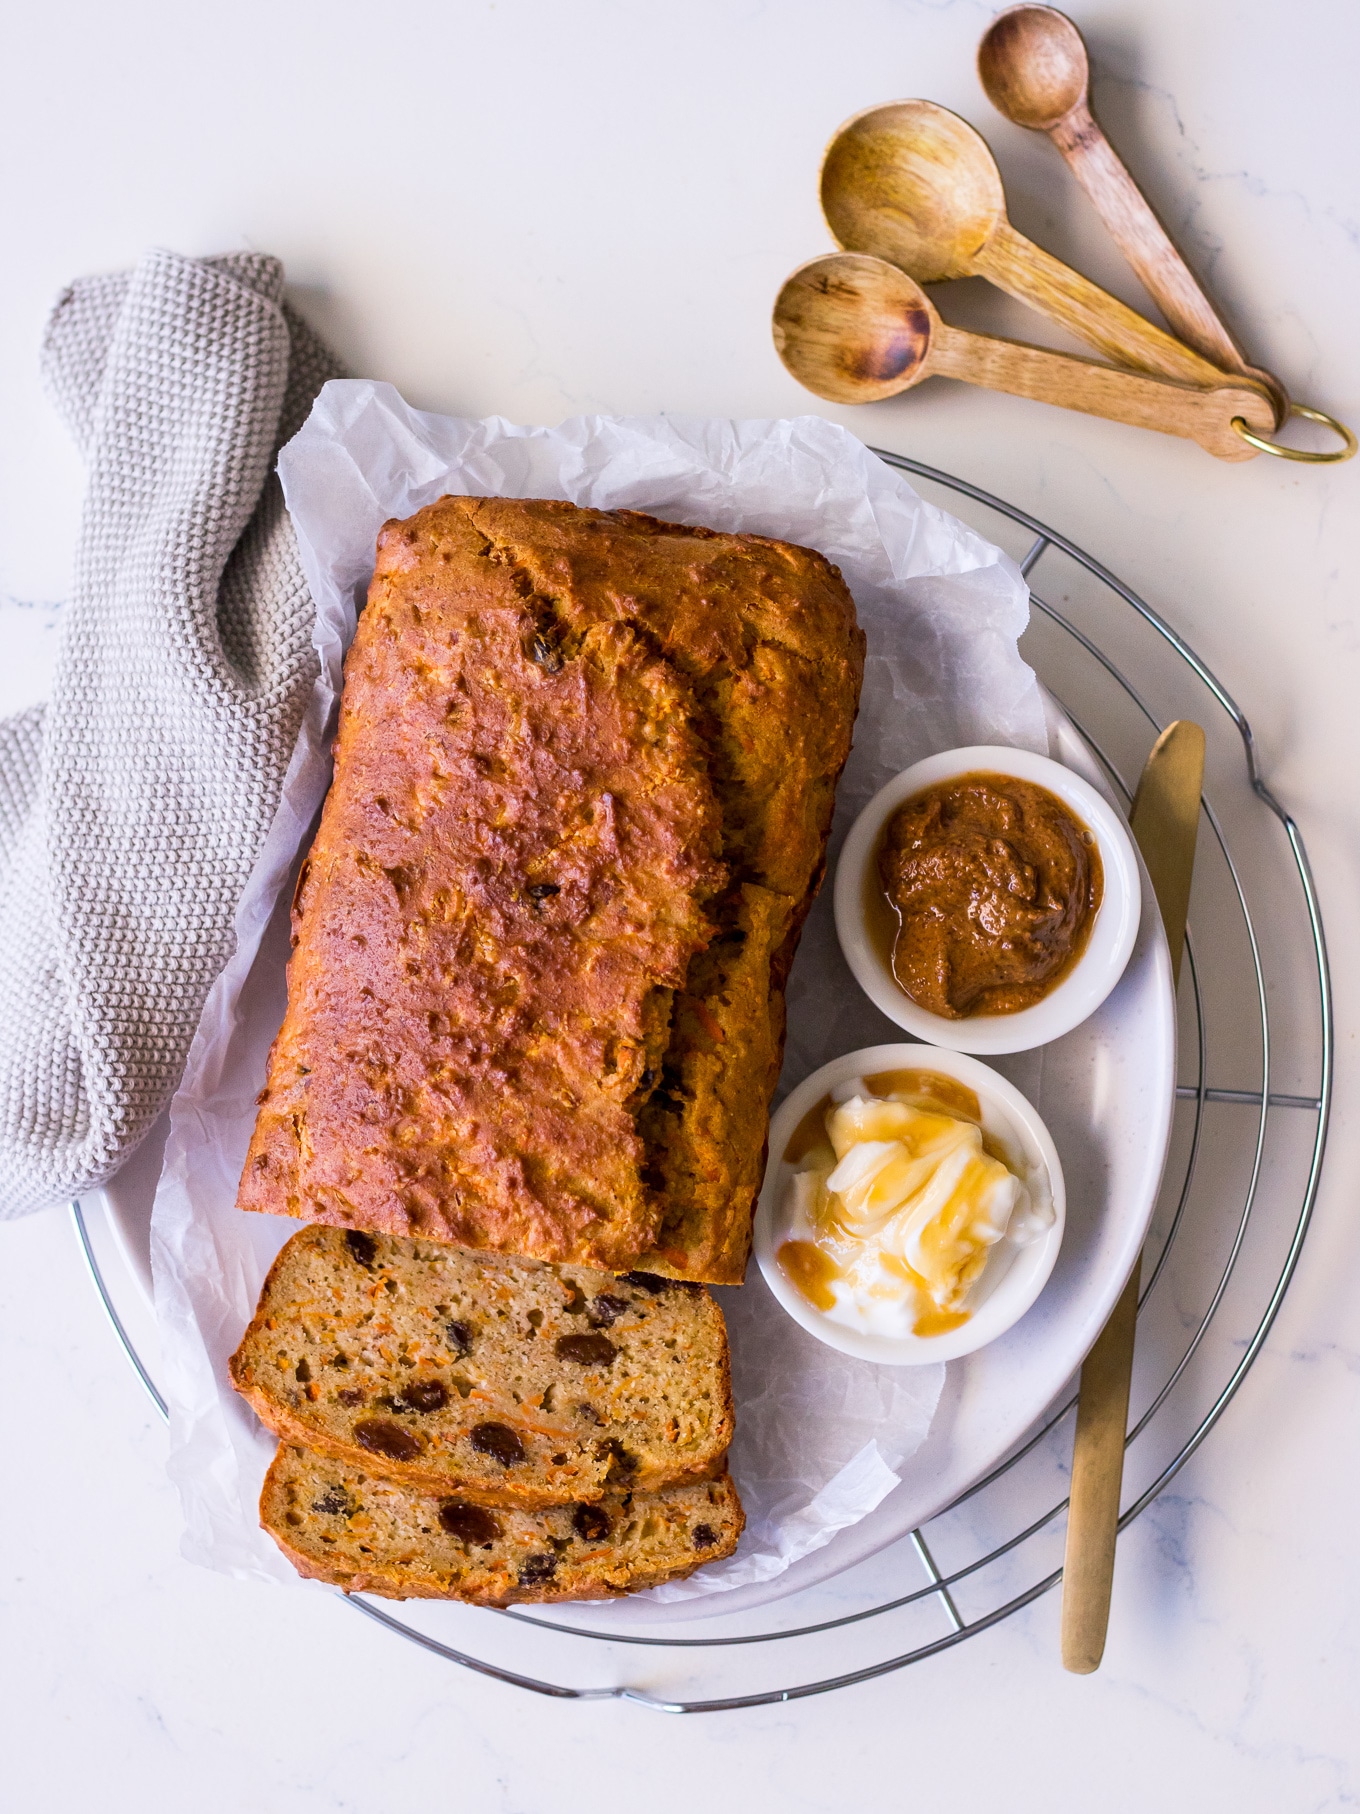 Banana and carrot loaf cake with sultanas and spreads